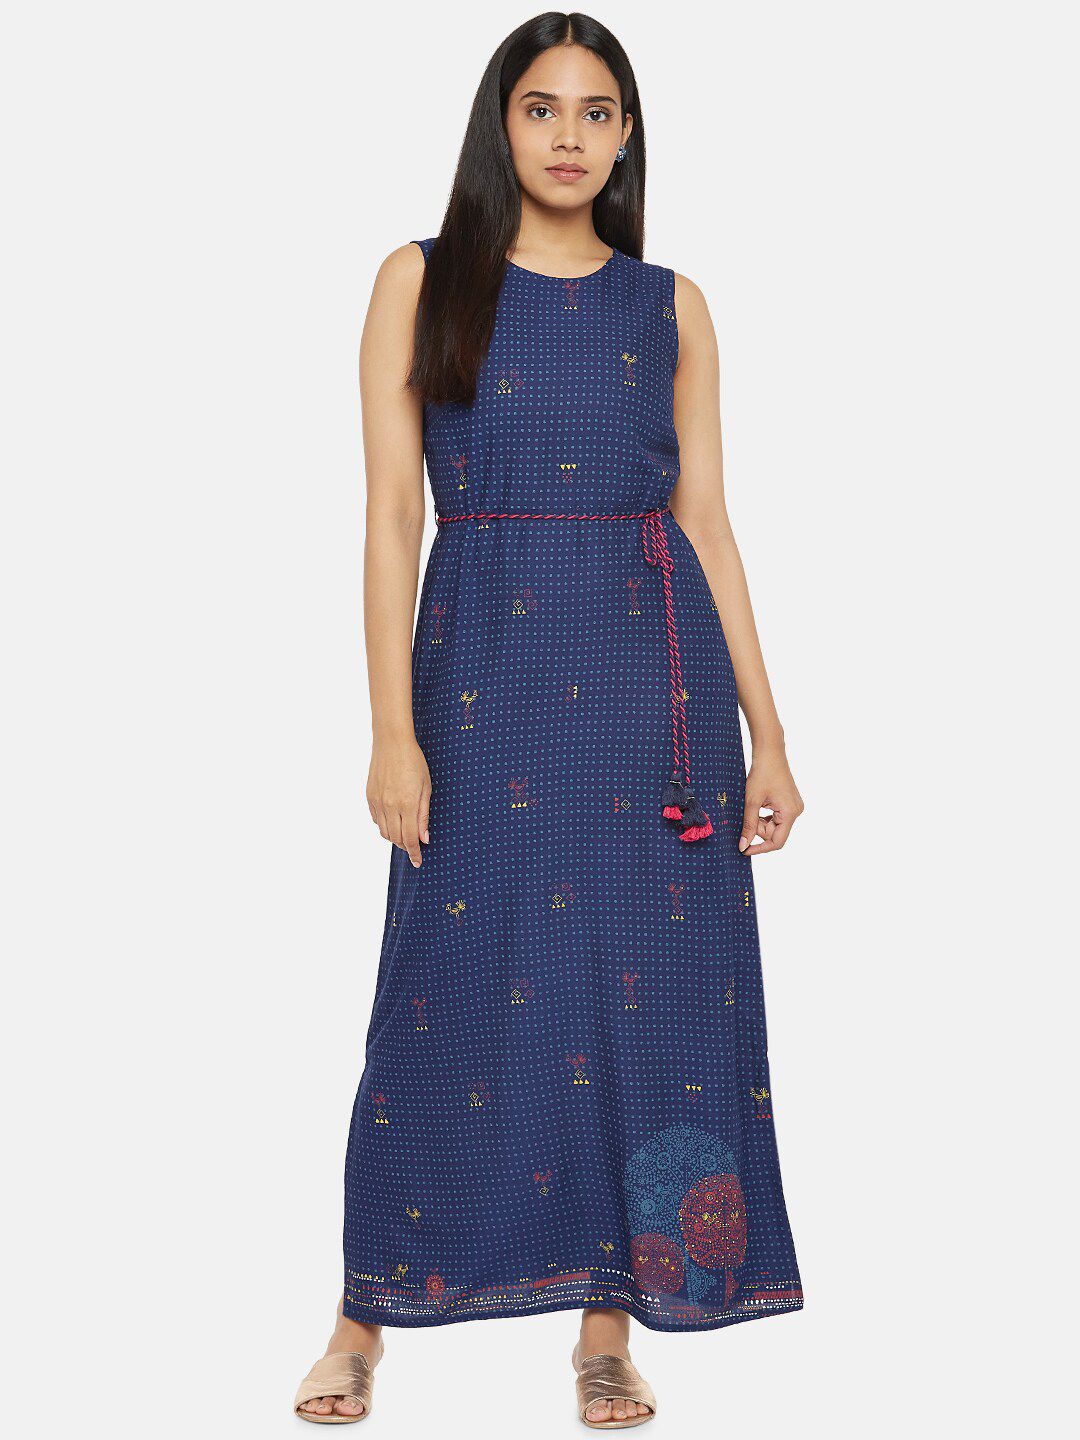 AKKRITI BY PANTALOONS Women Navy Blue Self Design Maxi Dress with Belt Price in India